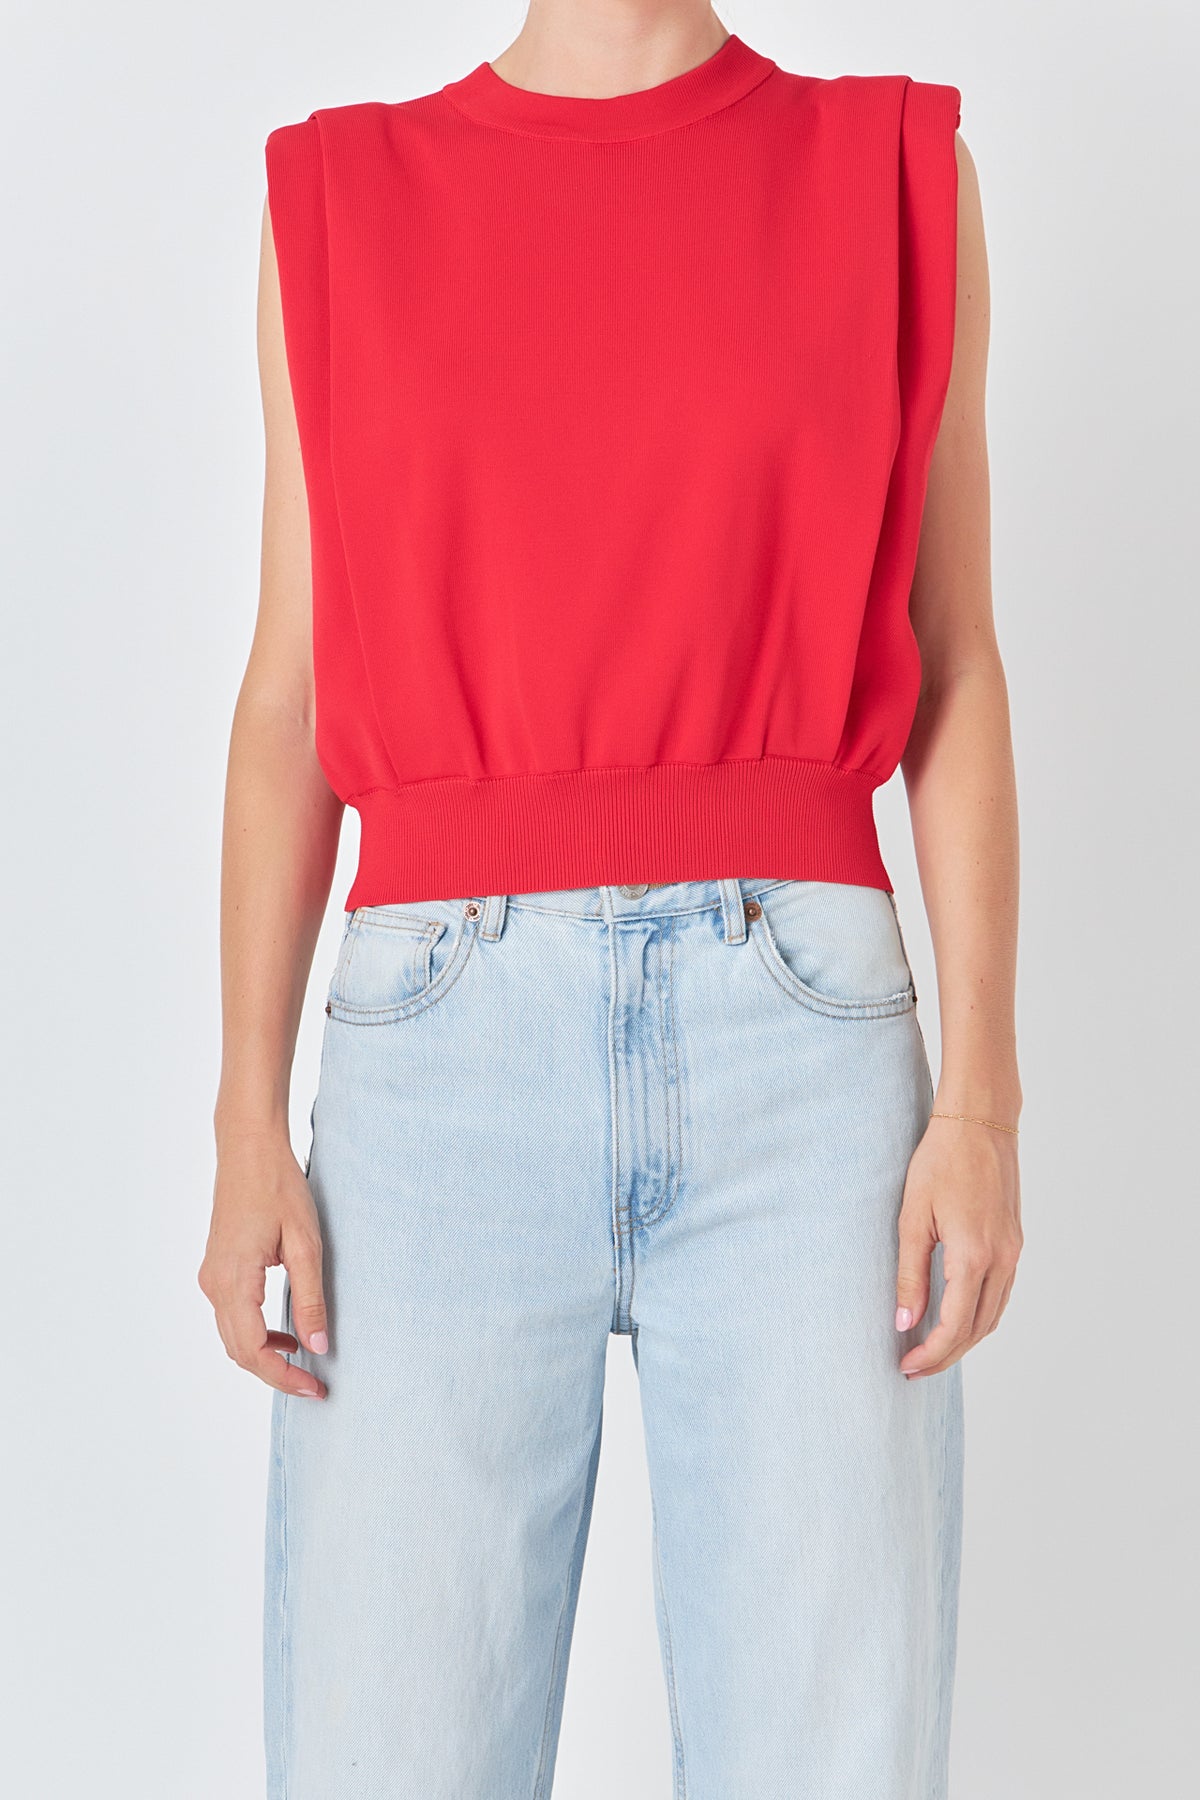 ENDLESS ROSE - Powder Shoulder Sleeveless Top - TOPS available at Objectrare